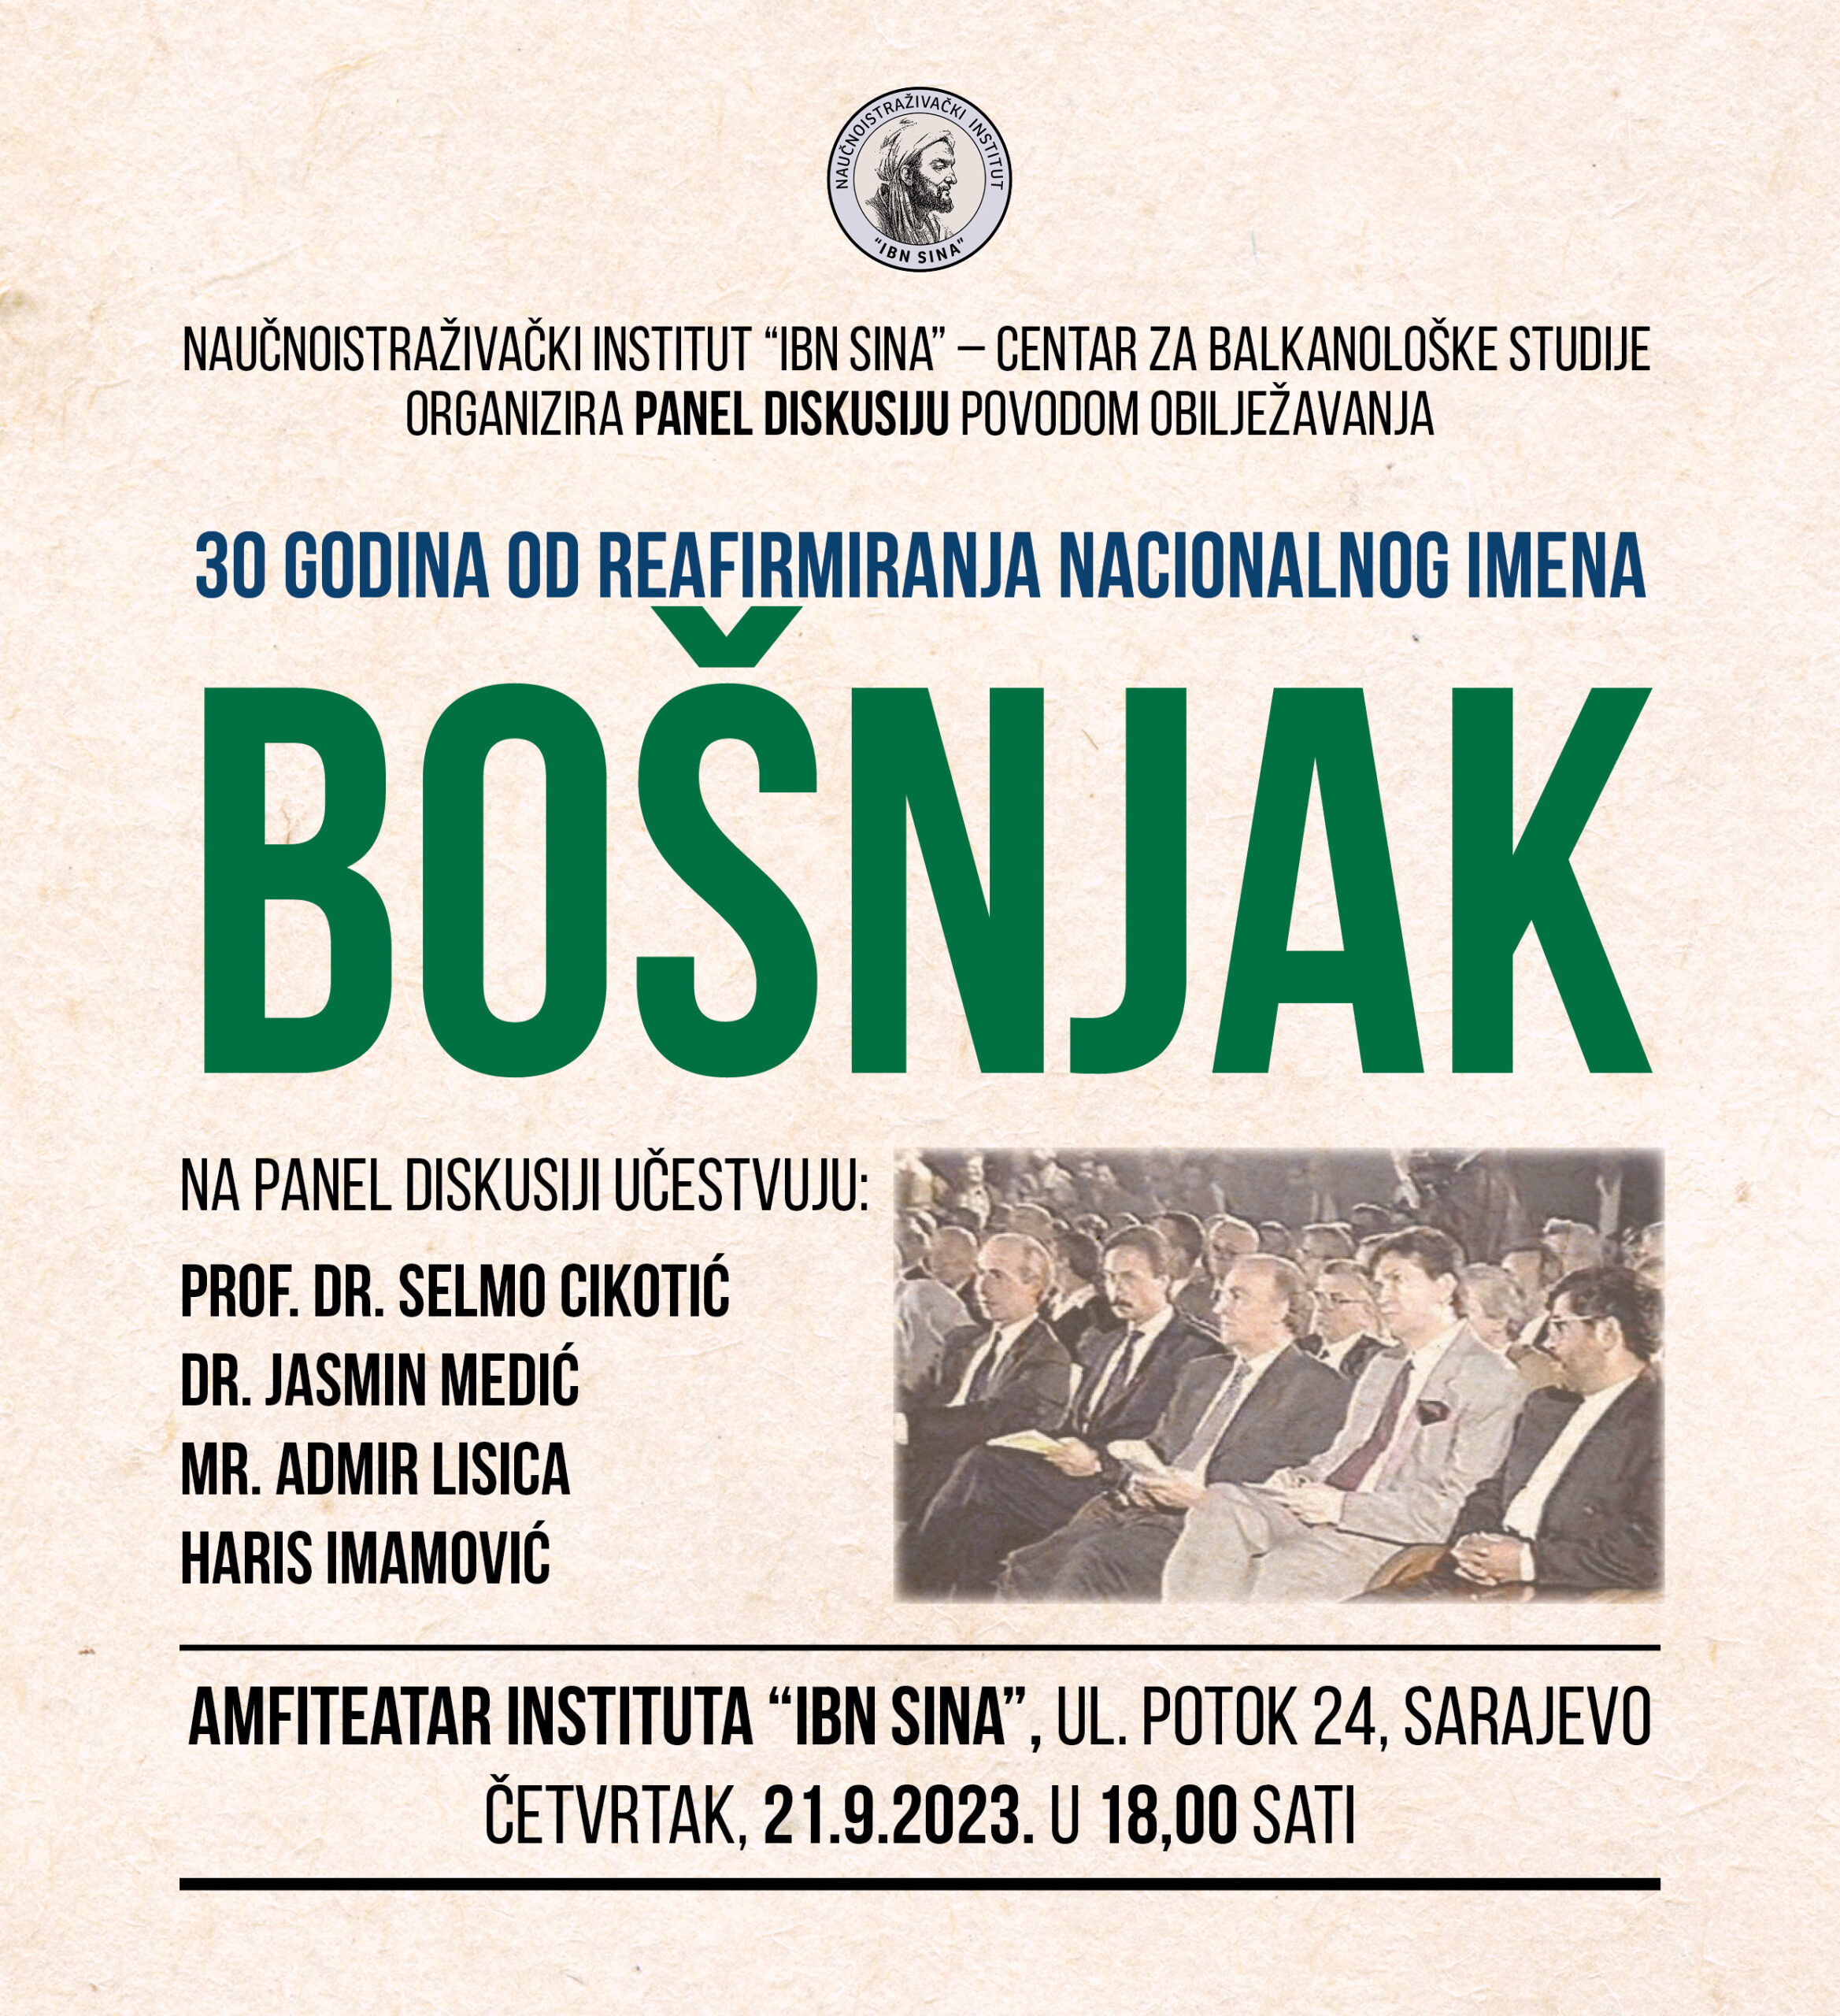 The Centre for Balkan Studies of the Research Institute “Ibn Sina” is organizing a panel discussion on the occasion of marking 30 years since the re-affirmation of the national name Bosniak